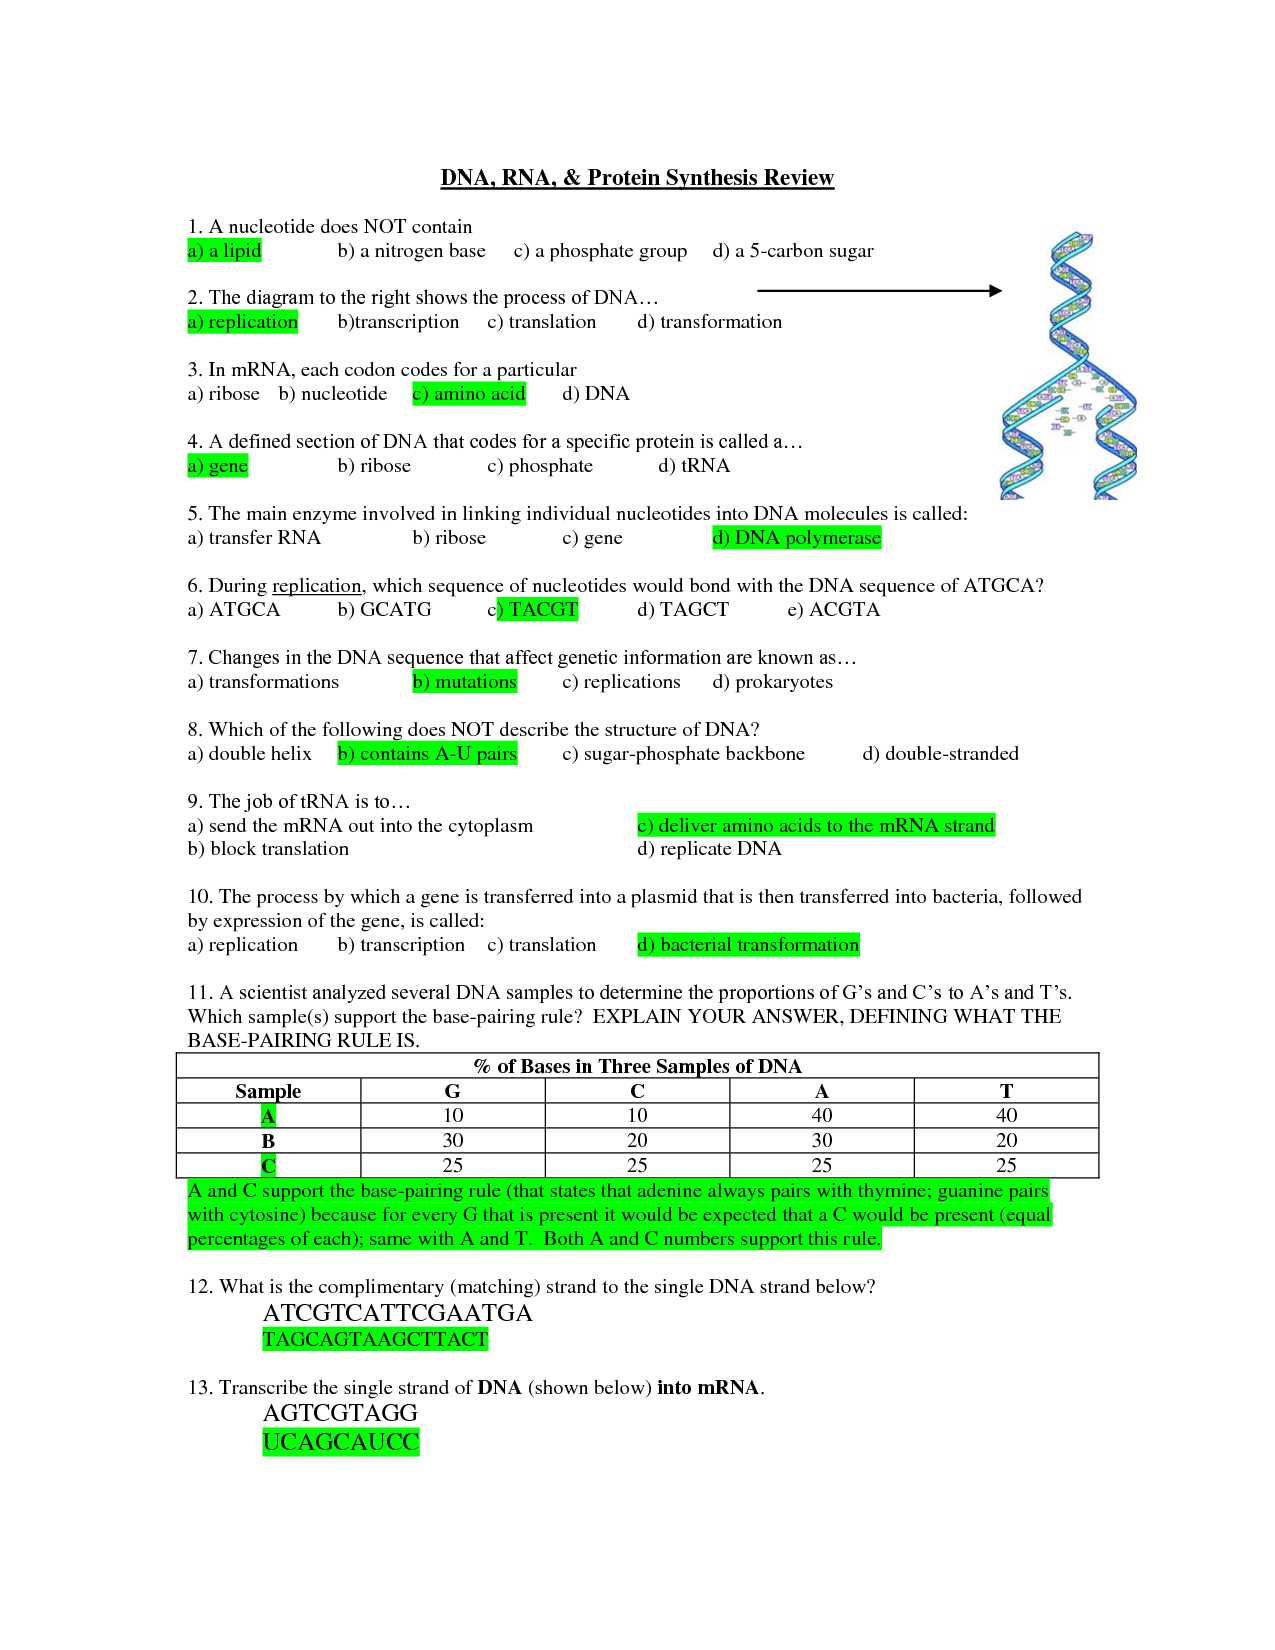 Dna Protein Synthesis Review Worksheet as Well as Dna Rna and Protein Synthesis Worksheet Image Collections